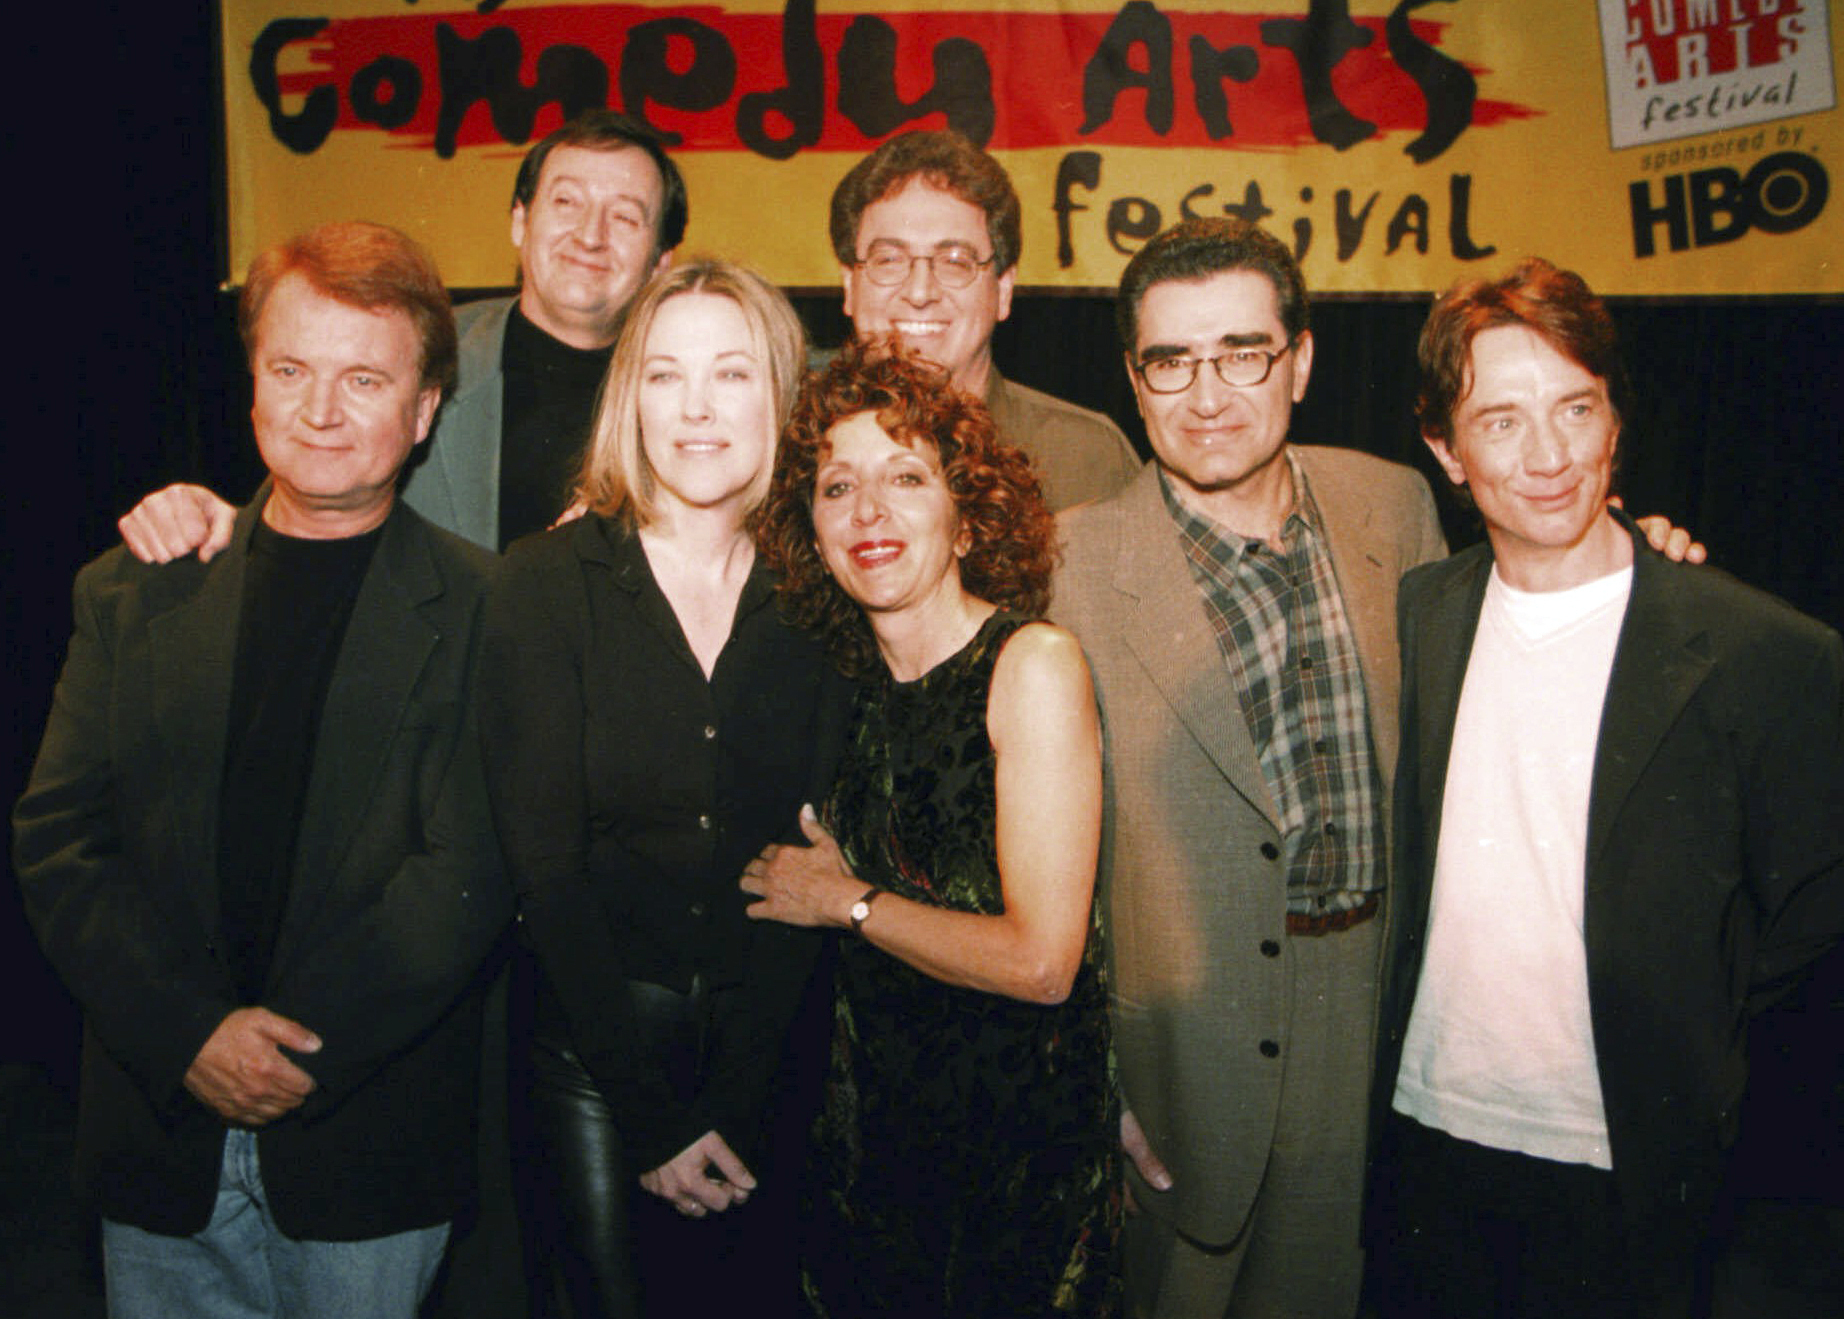 FILE - Former cast members of SCTV, from left, Dave Thomas, Joe Flaherty, Catherine O'Hara, Andrea Martin, foreground, Harold Ramis, Eugene Levy and Martin Short, pose at the U.S. Comedy Arts Festival on March 6, 1999, in Aspen, Colo. Flaherty, a founding member of the Canadian sketch series “SCTV,” died Monday, April 1, 2024 at age 82. (AP Photo/E Pablo Kosmicki, File)